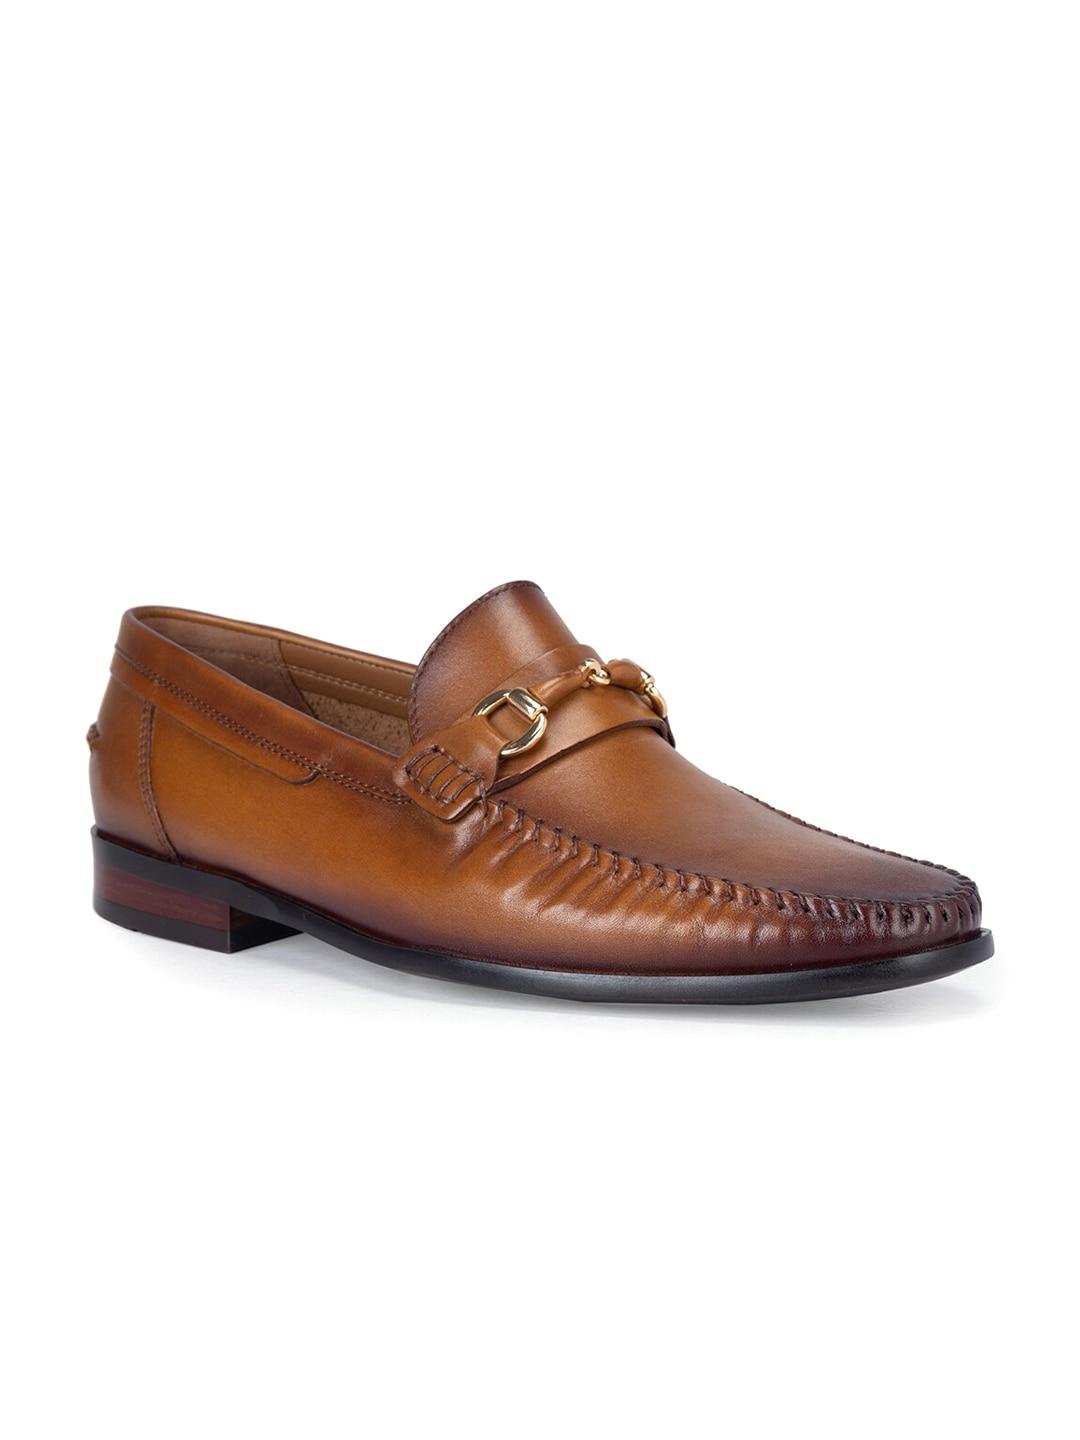 ROSSO BRUNELLO Men Leather Slip-On Loafers